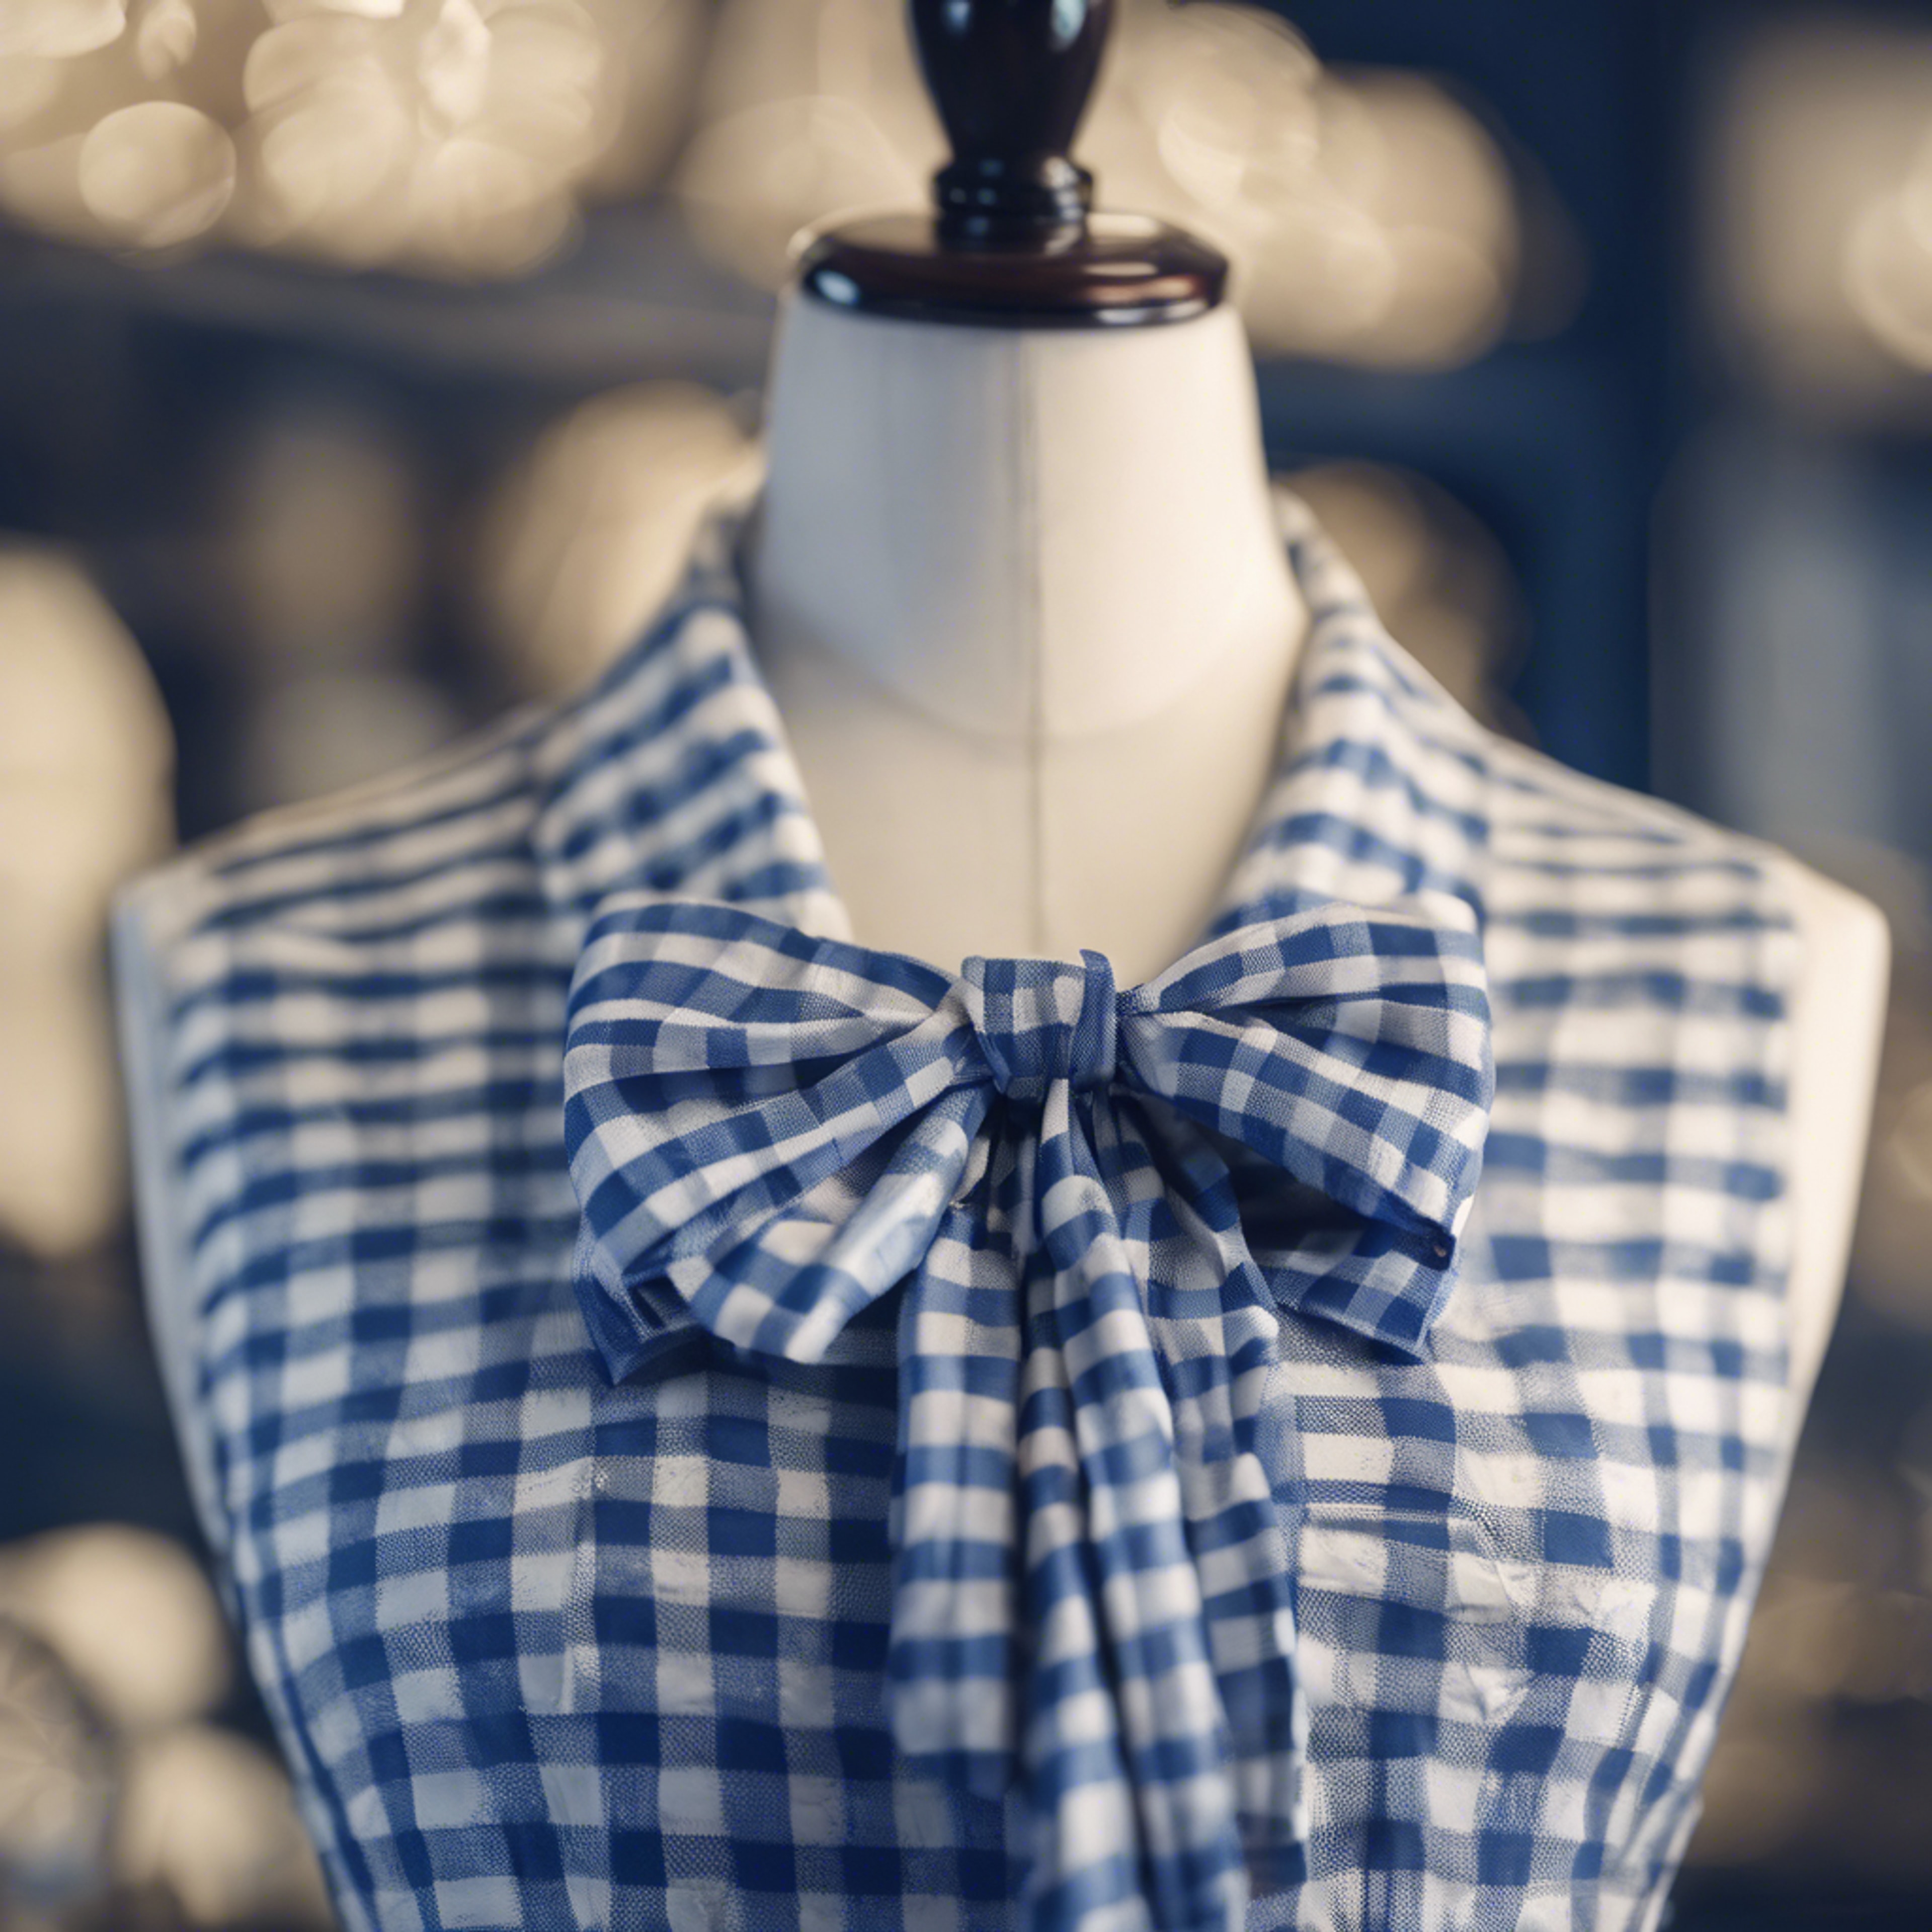 A preppy style blue and white chequered dress with a neatly tied bow on a mannequin.” Behang[2cff79e4d79d40c780d3]